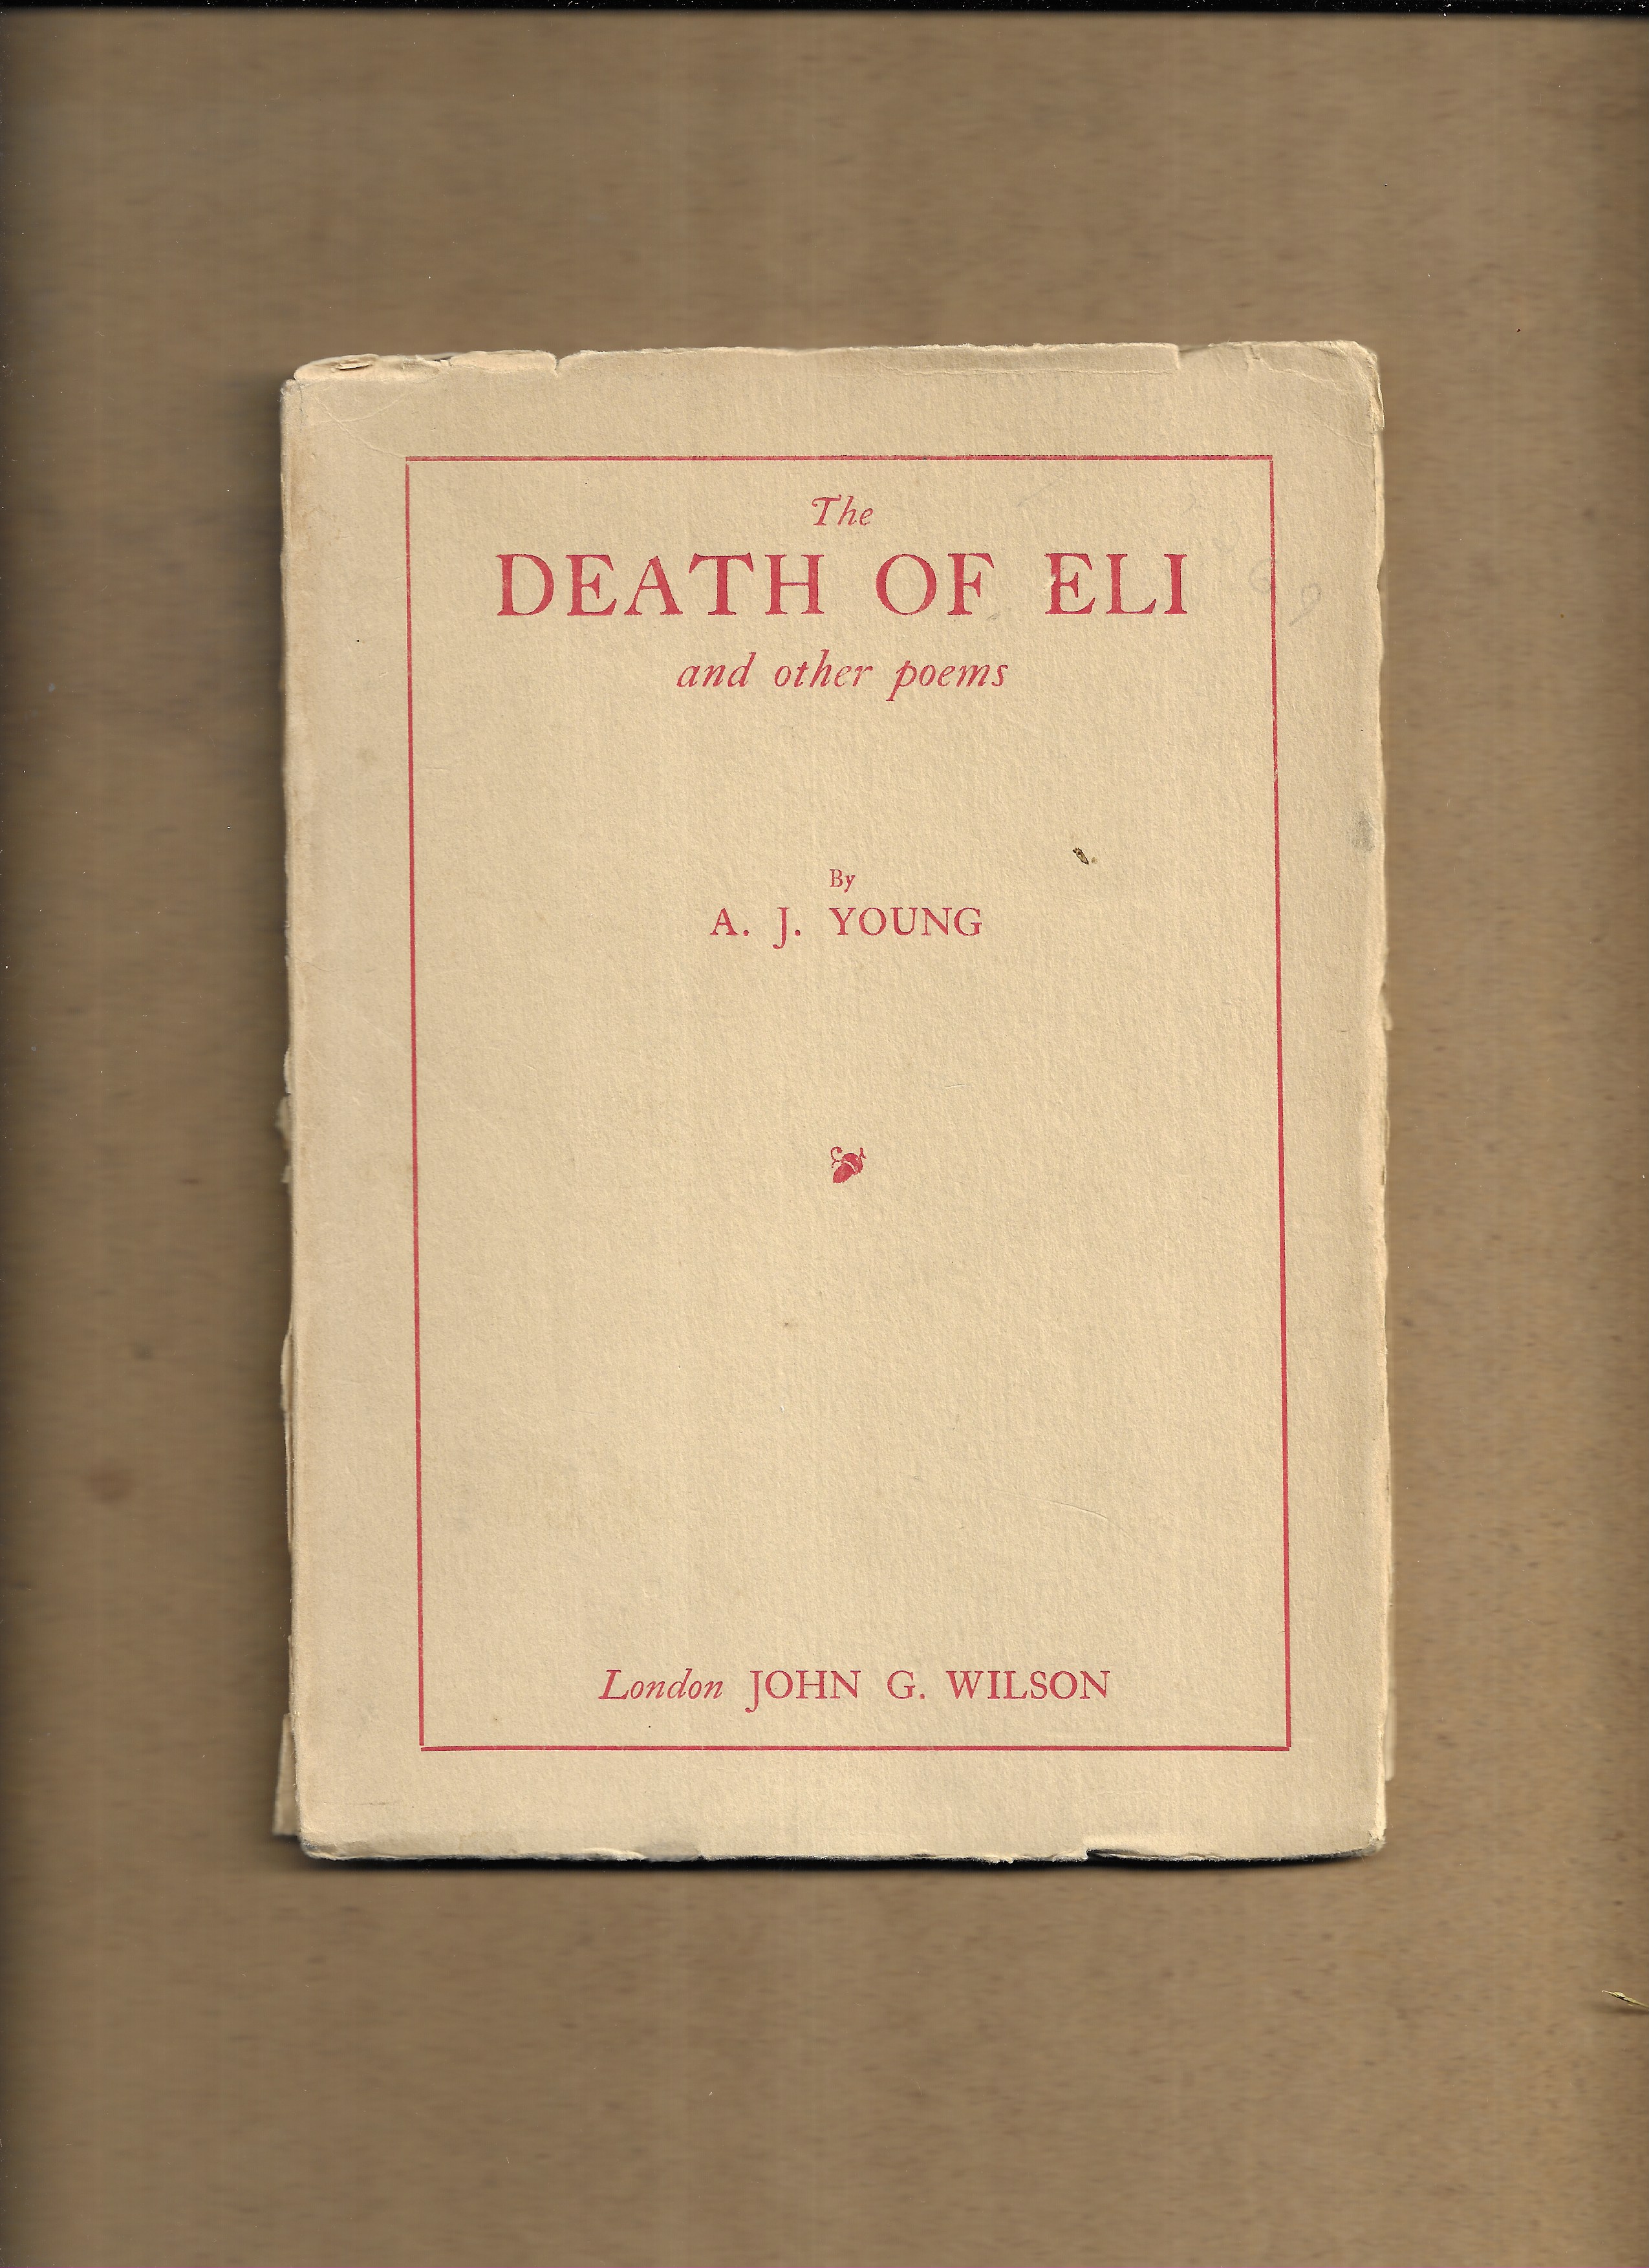 The Death of Eli and other poems by Young, Andrew 1885-1971: Very Good ...